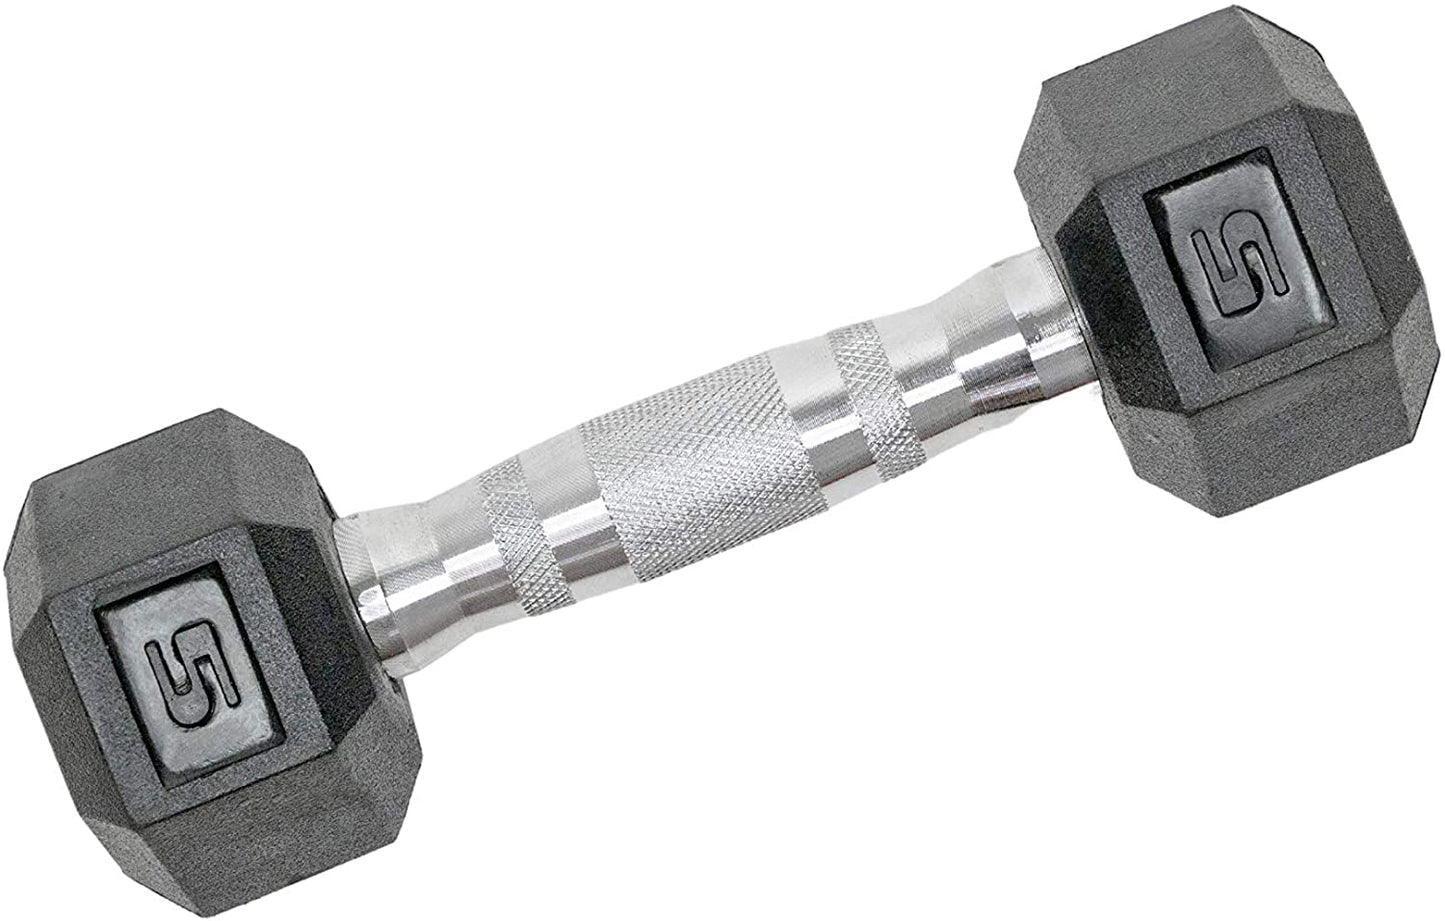 Rubber HEX Free Hand Weights Dumbbell Pairs Sizes 5, 10, 15, 20 and 25 LBS (5 LB Pair, Pair)